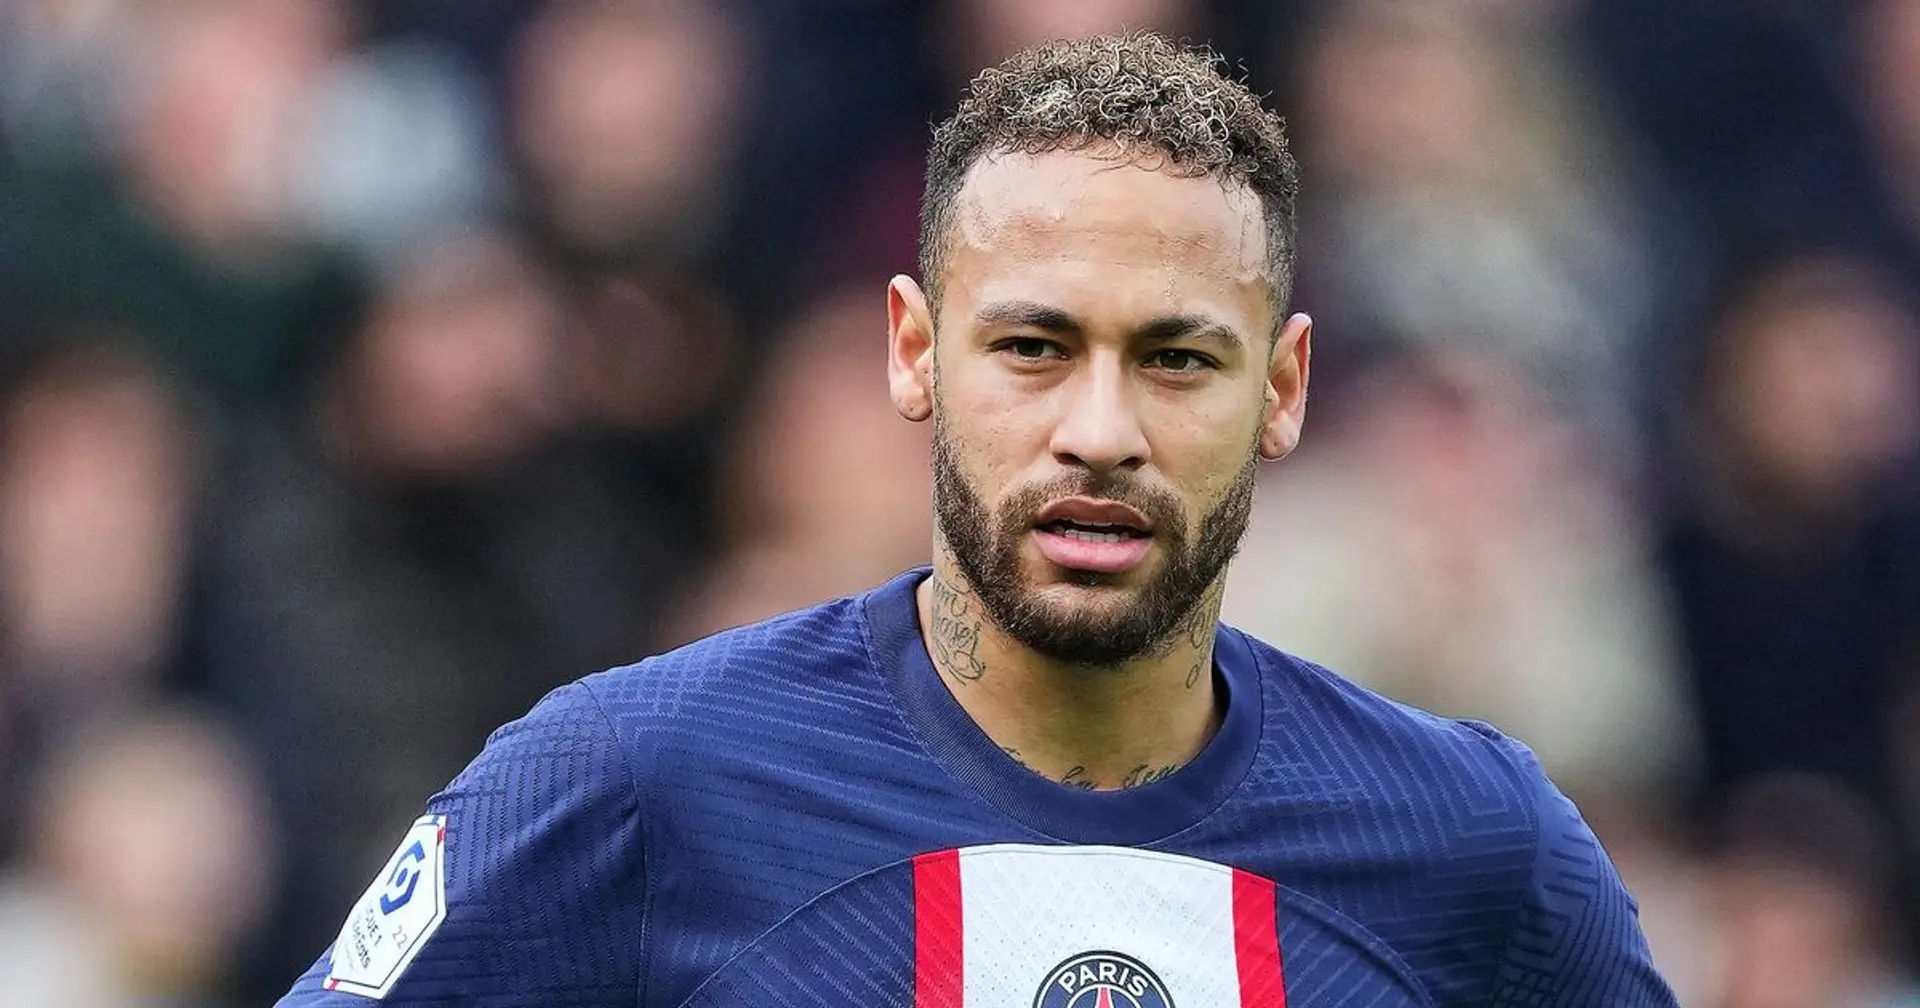 'He's not a good signing': Chelsea told to stay away from Neymar